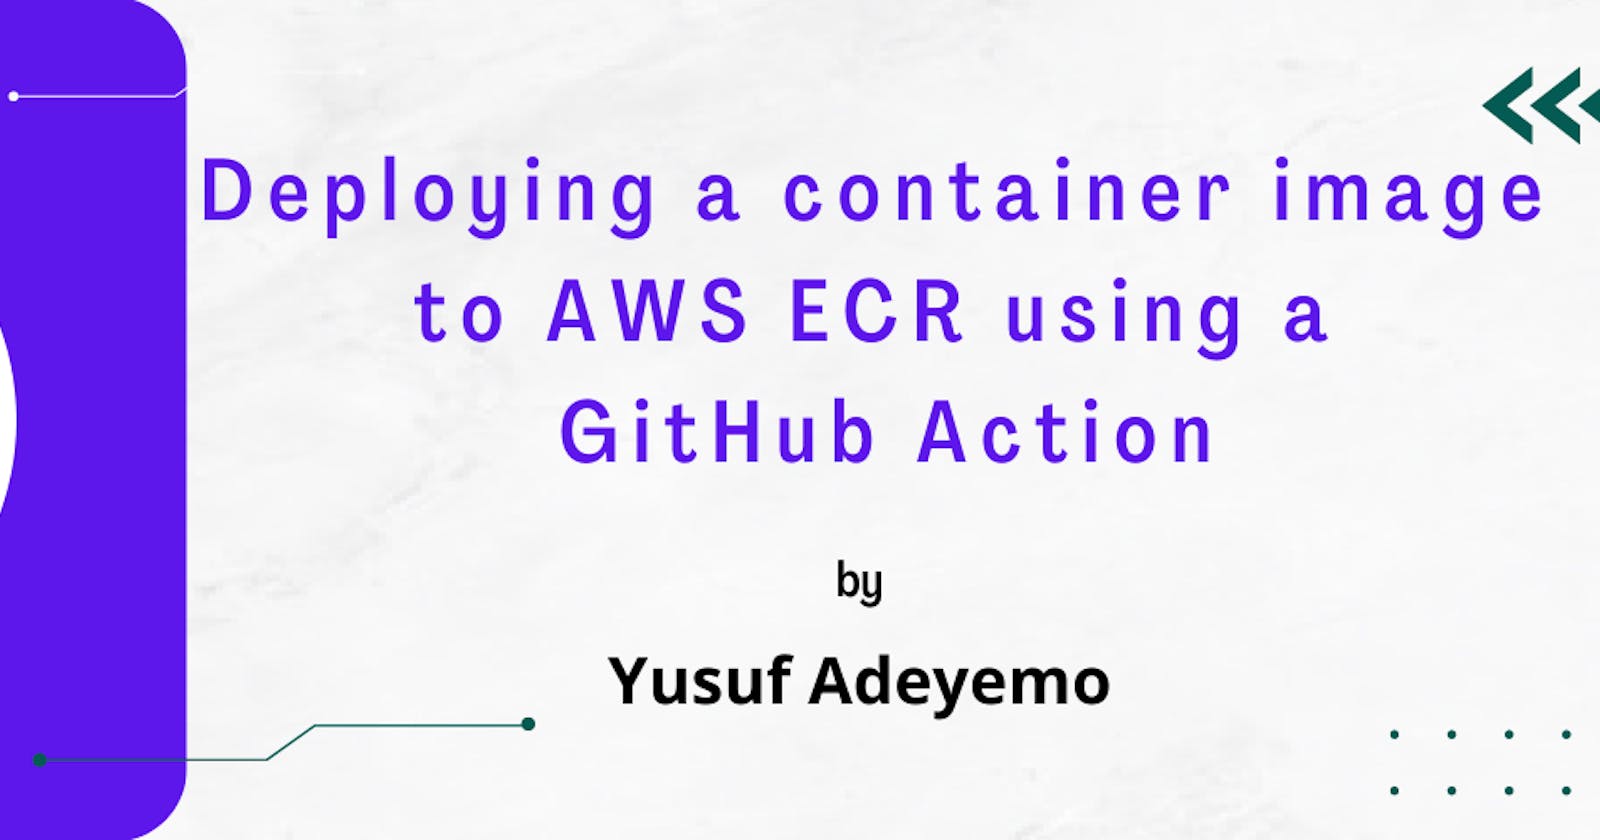 Deploying a container image to AWS ECR using a GitHub Action